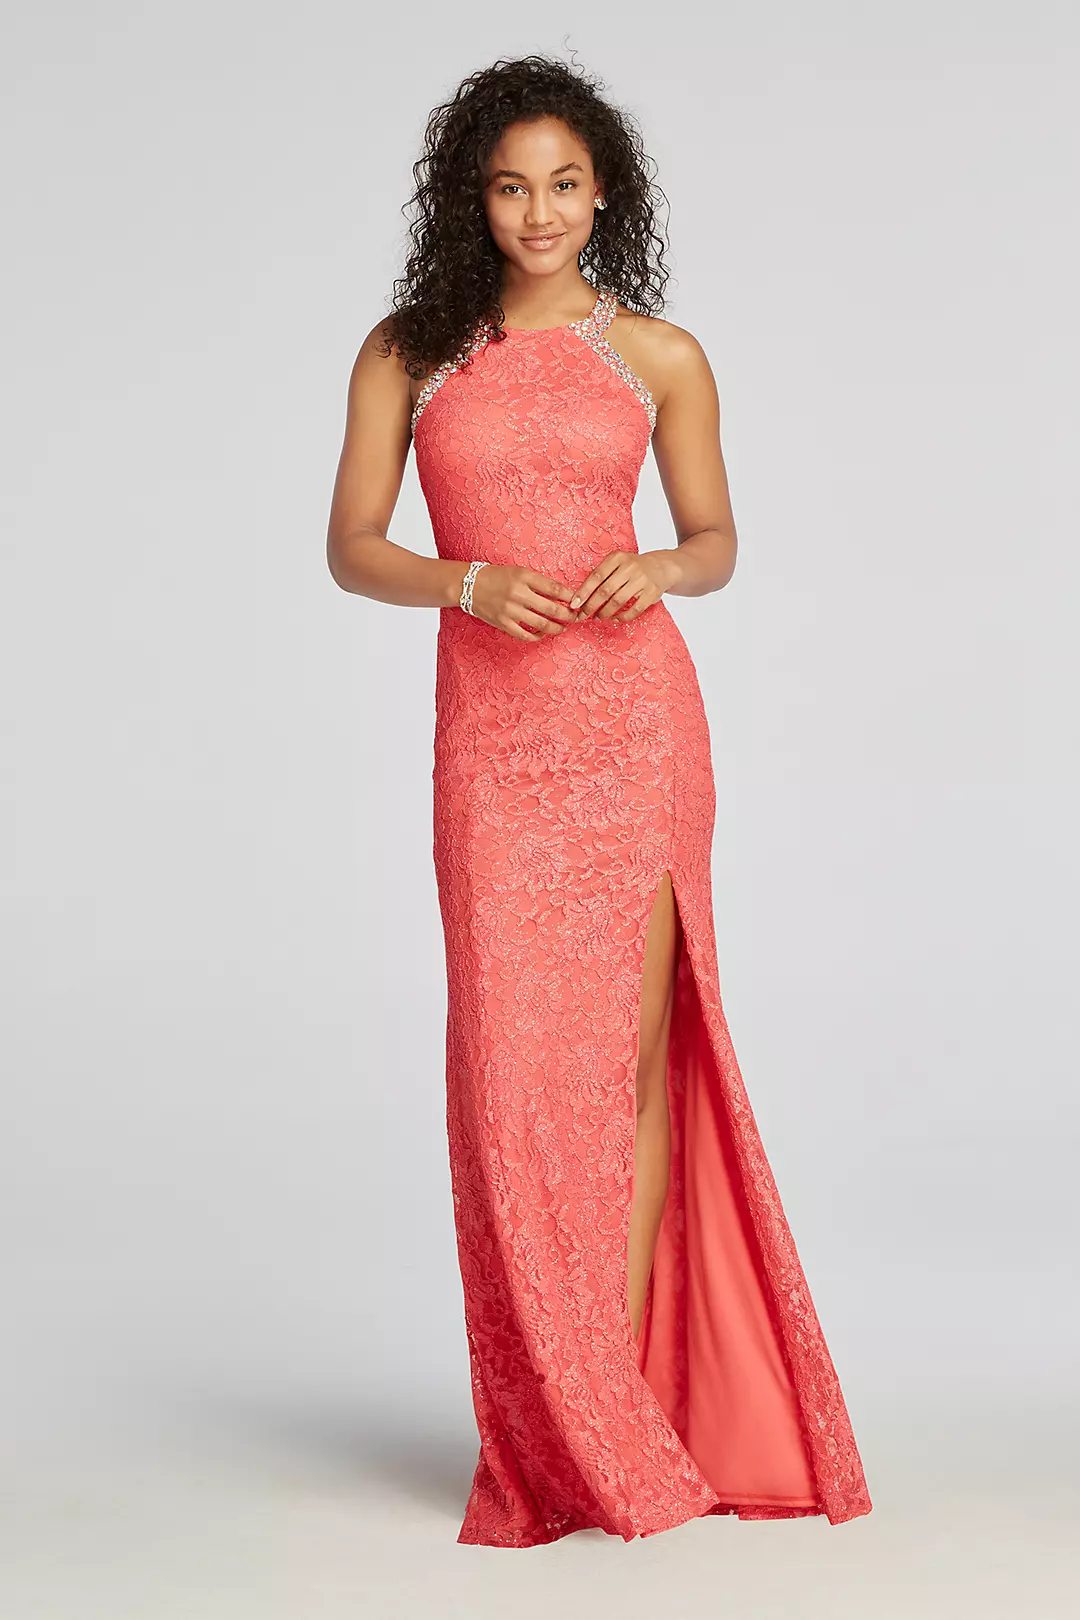 Halter Lace Prom Dress with Beaded Neckline Image